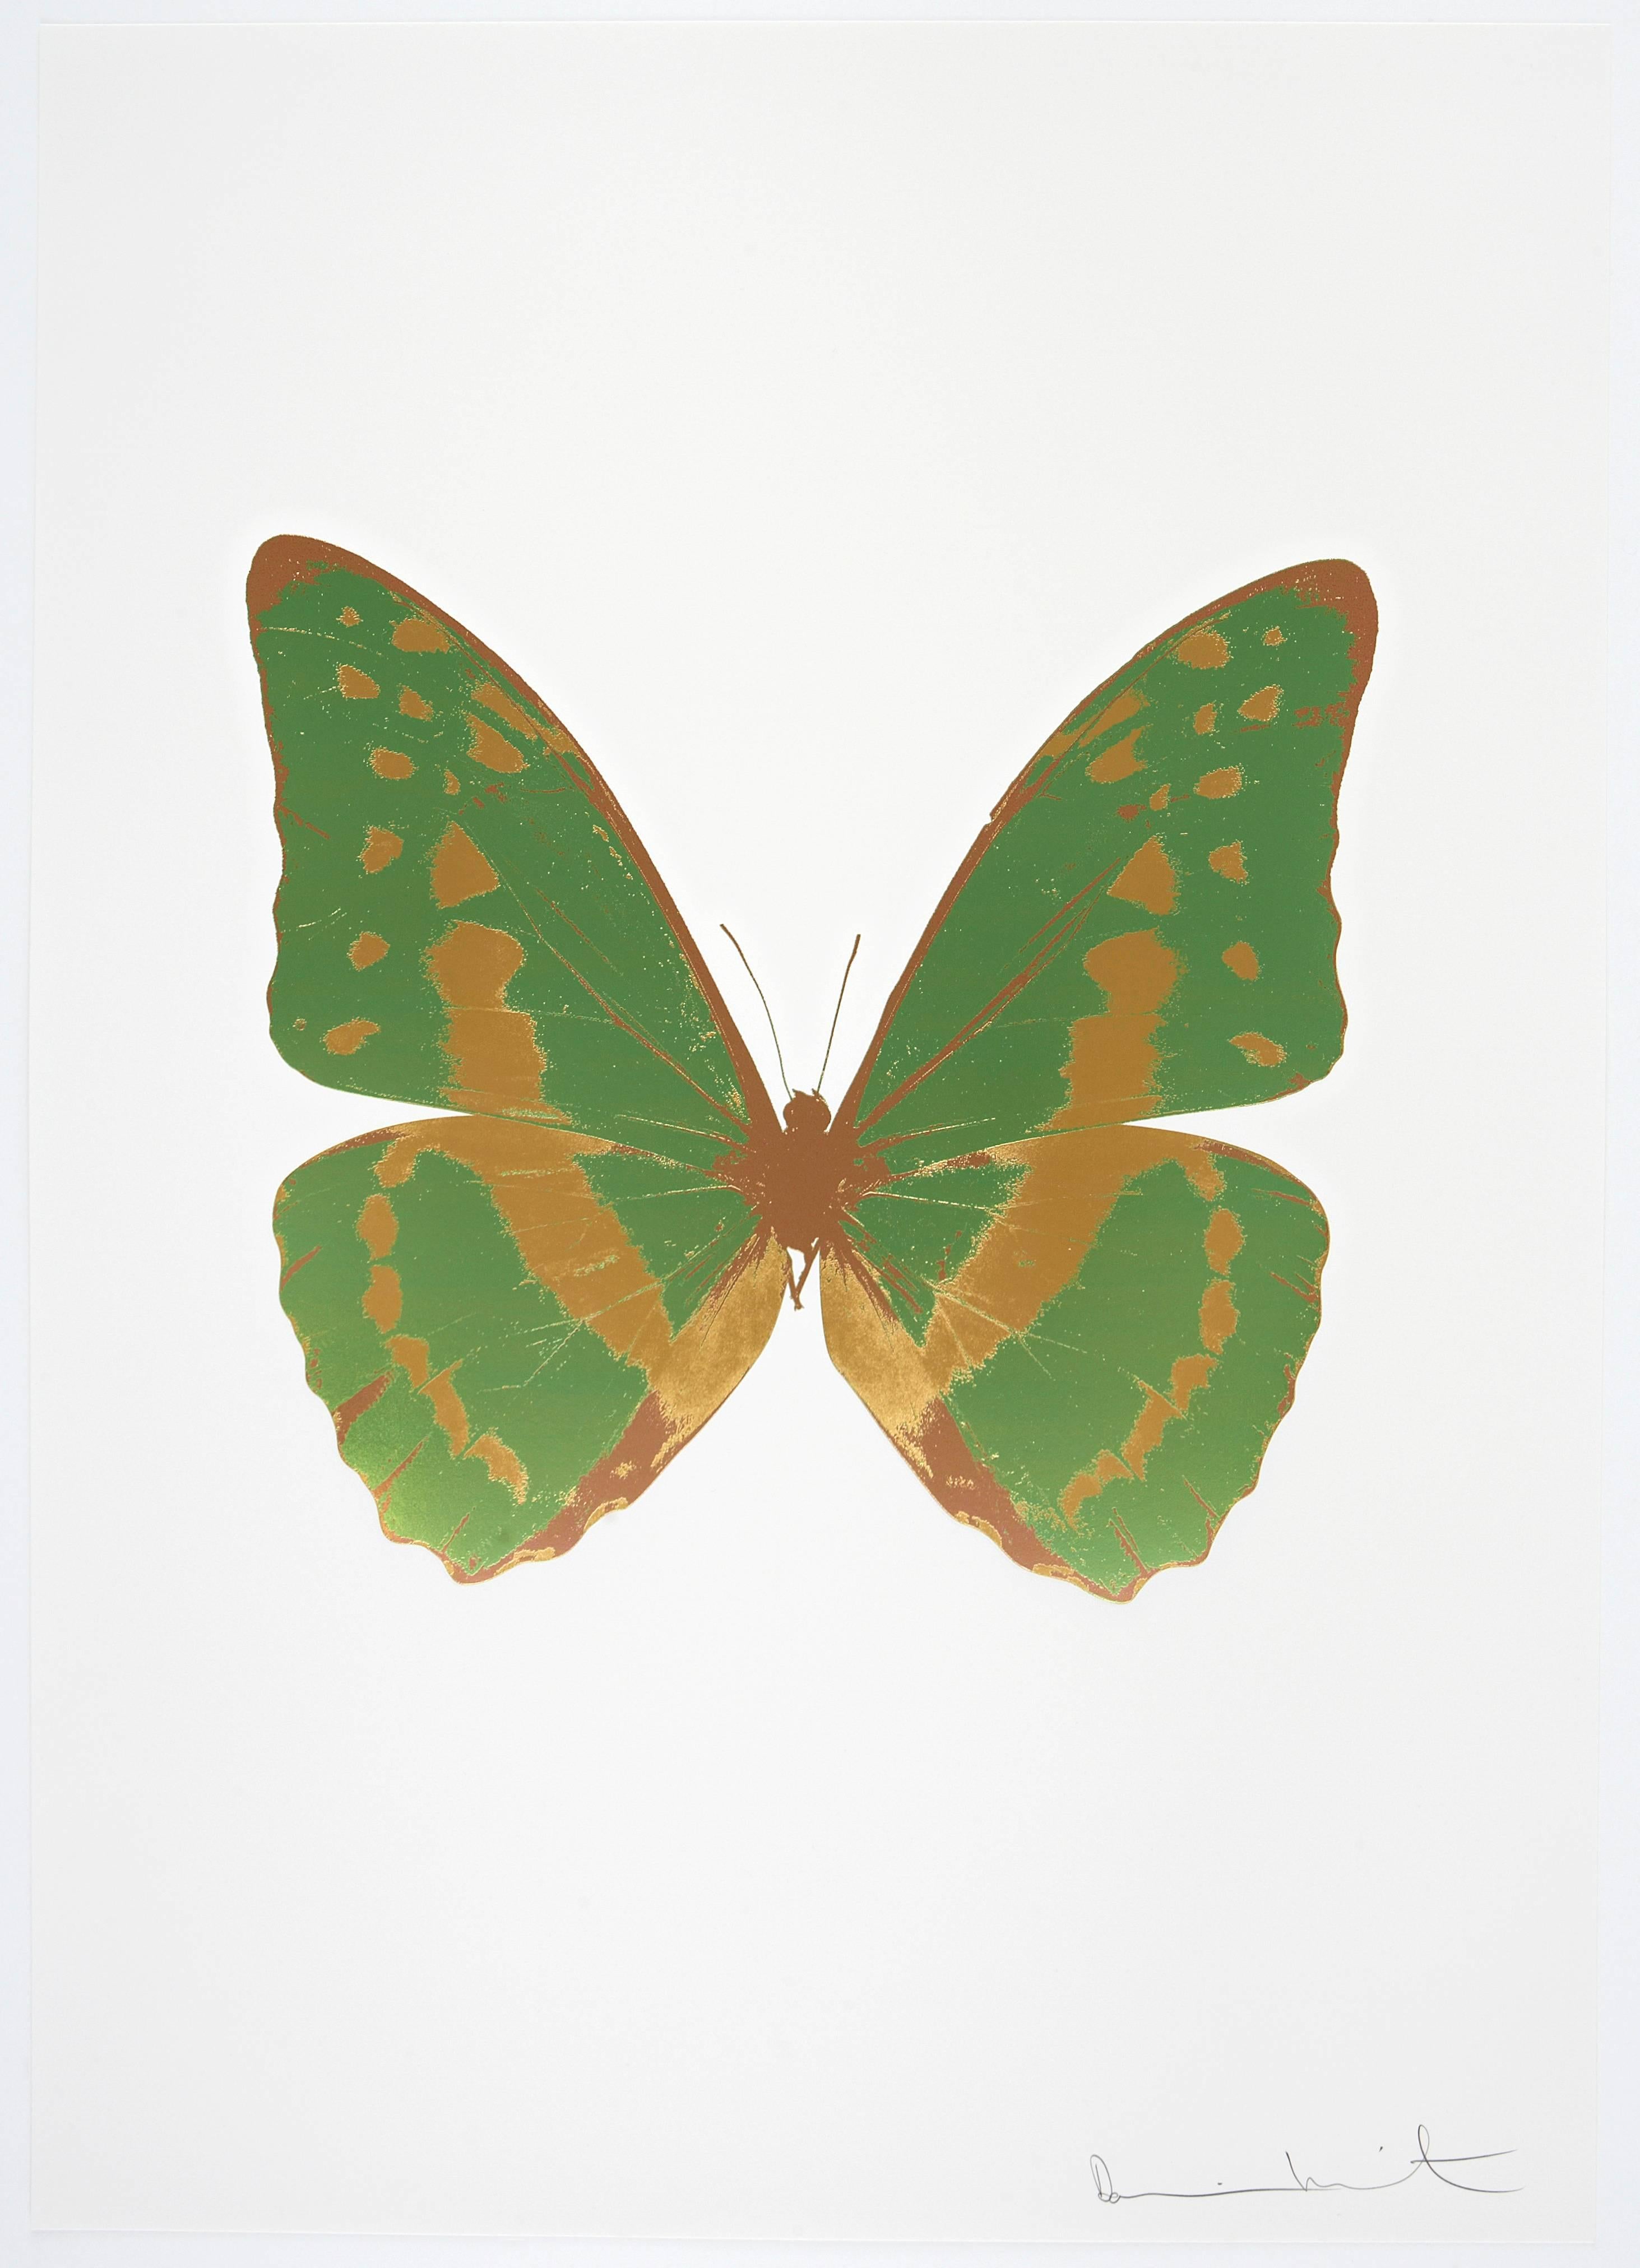 Damien Hirst Animal Print - The Souls III - Leaf Green/African Gold/Rustic Copper